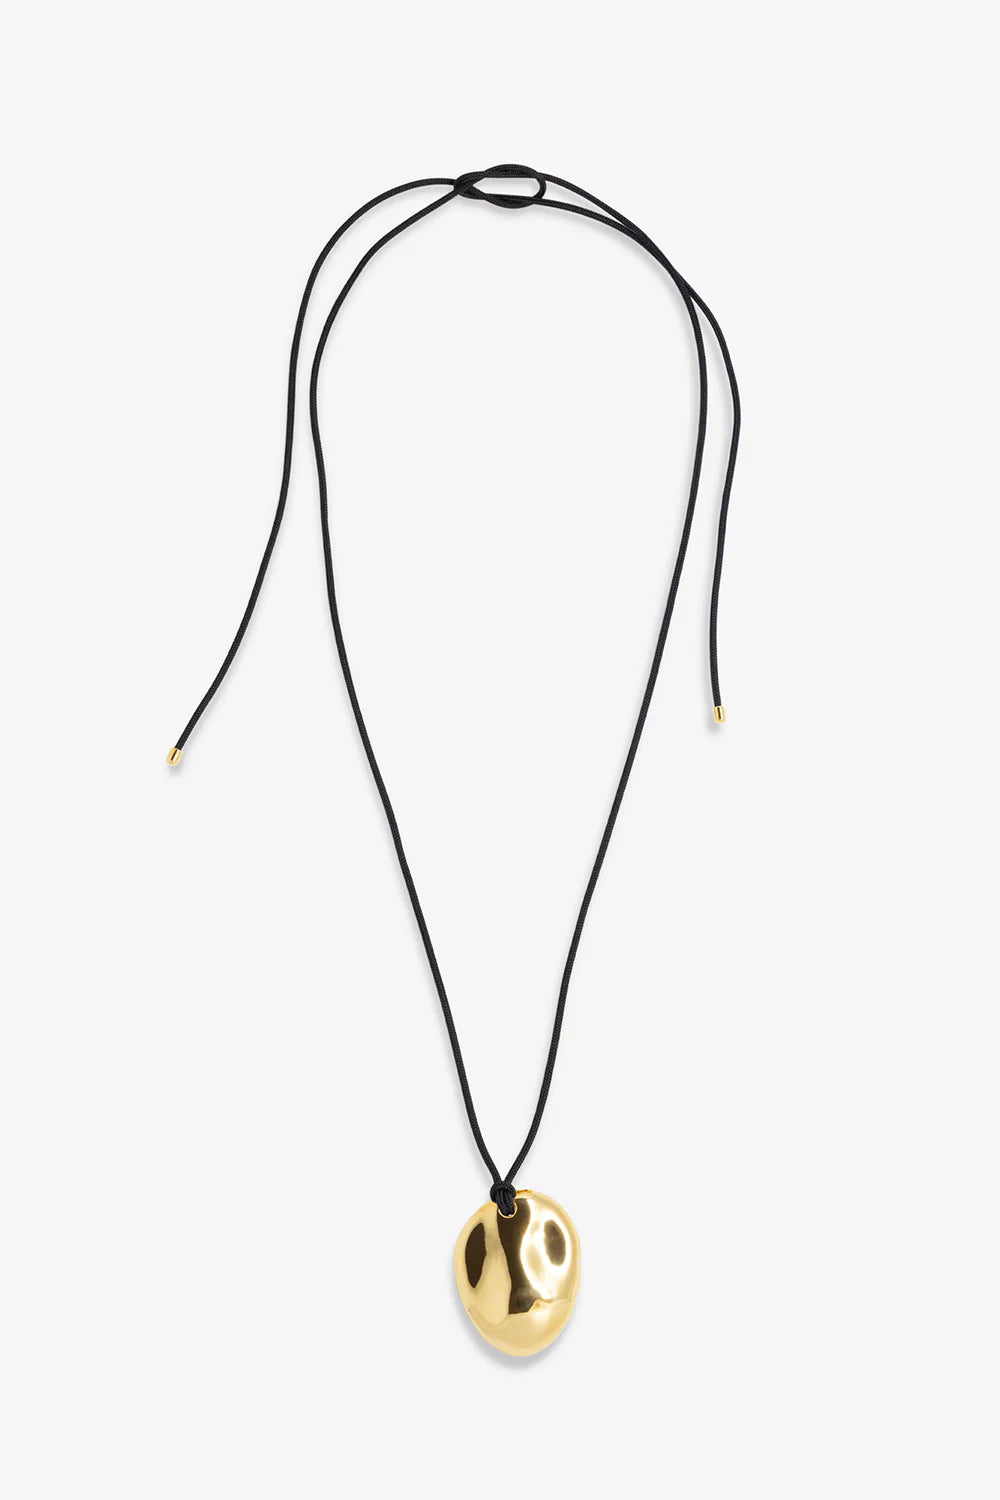 FLASH JEWELLERY Dylan Dome Necklace Black Cord - Laneway Boutique